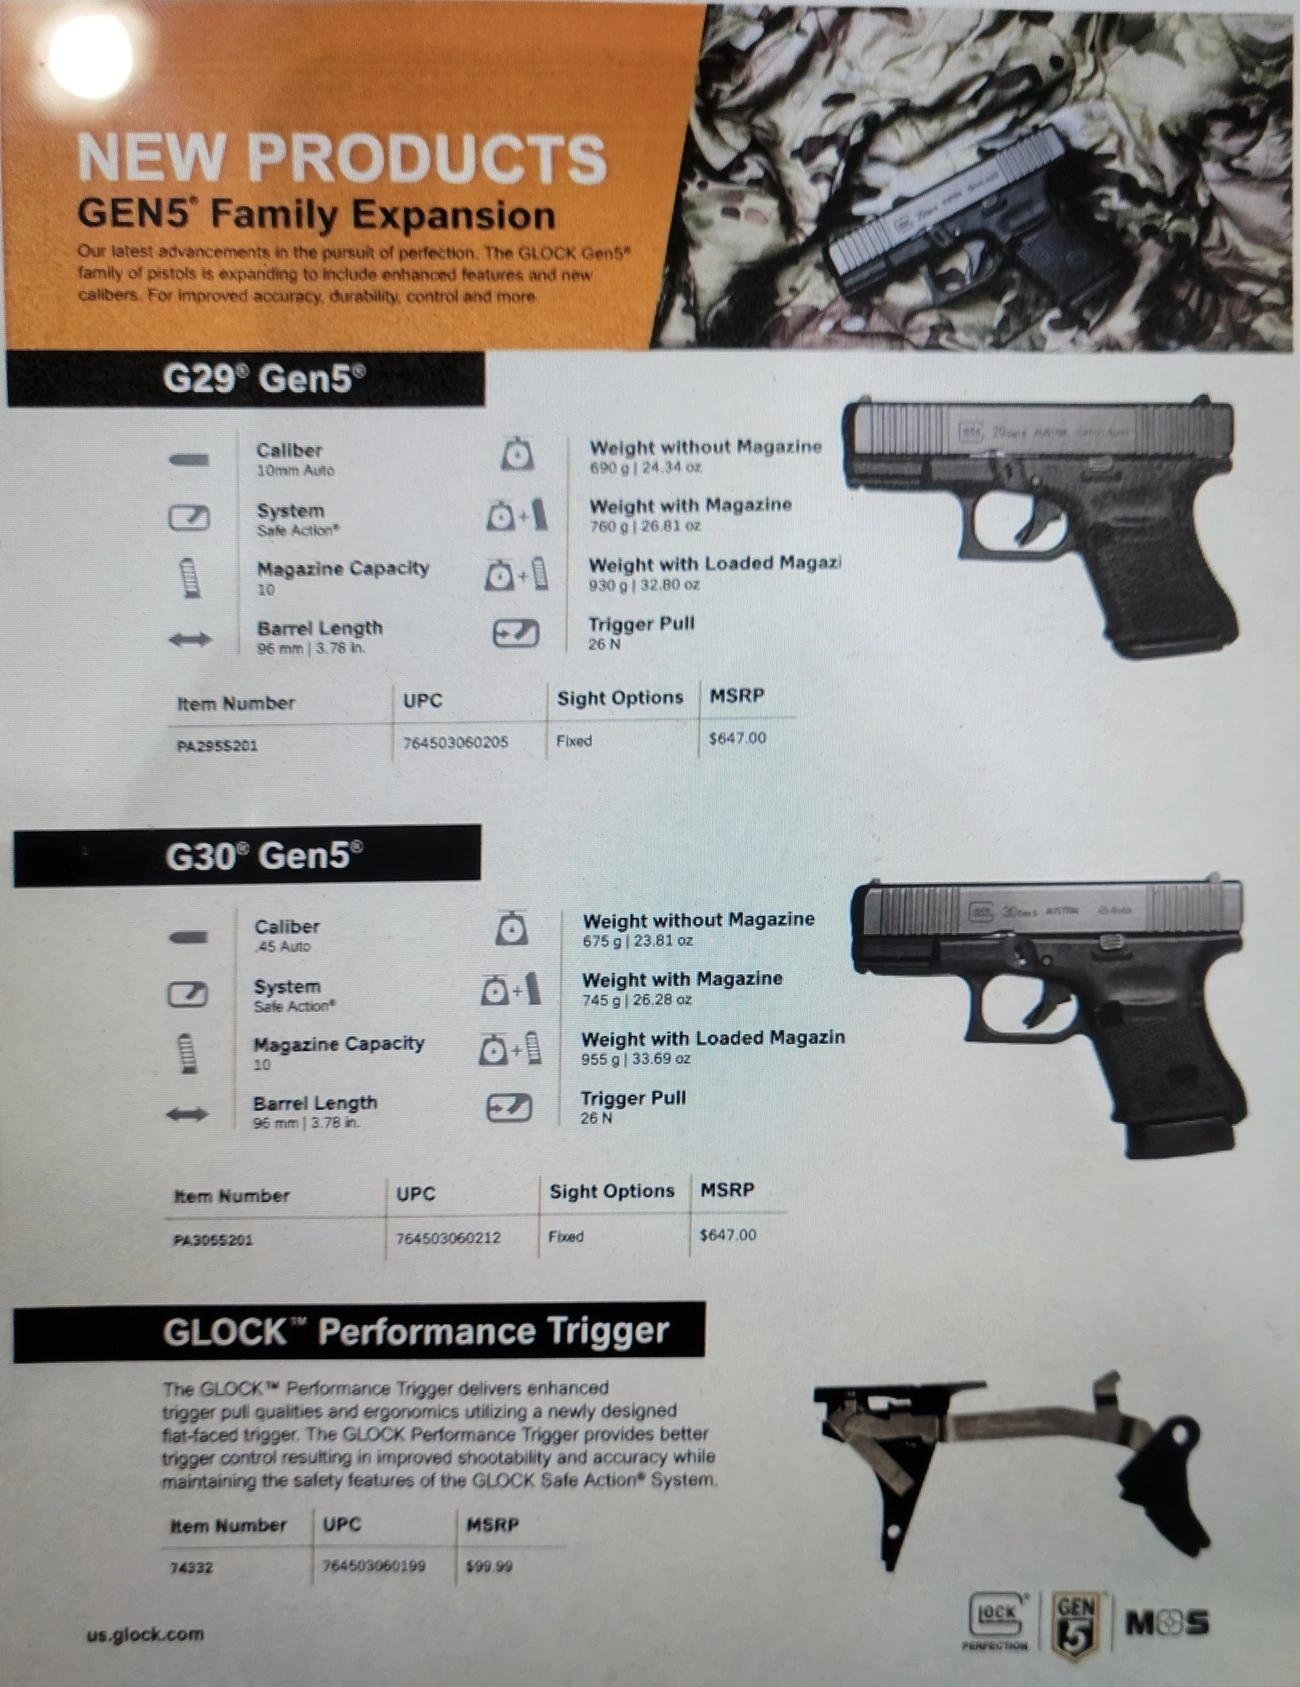 The Glock 30 & 29 product details